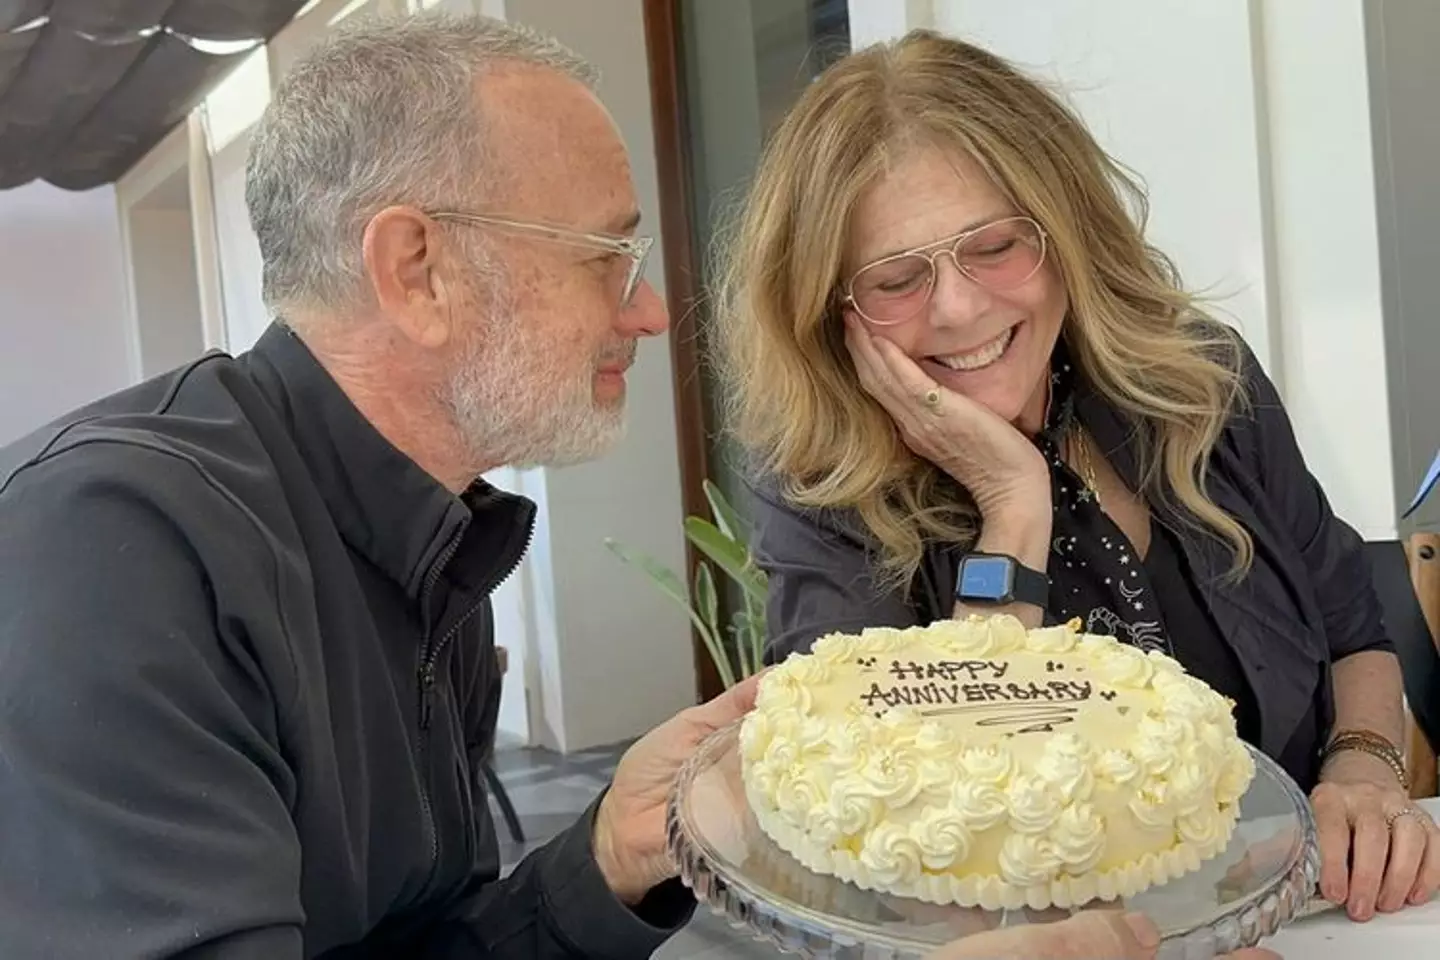 Tom Hanks and Rita Wilson celebrate their 35th wedding anniversary after sharing a sweet photo together on social media.